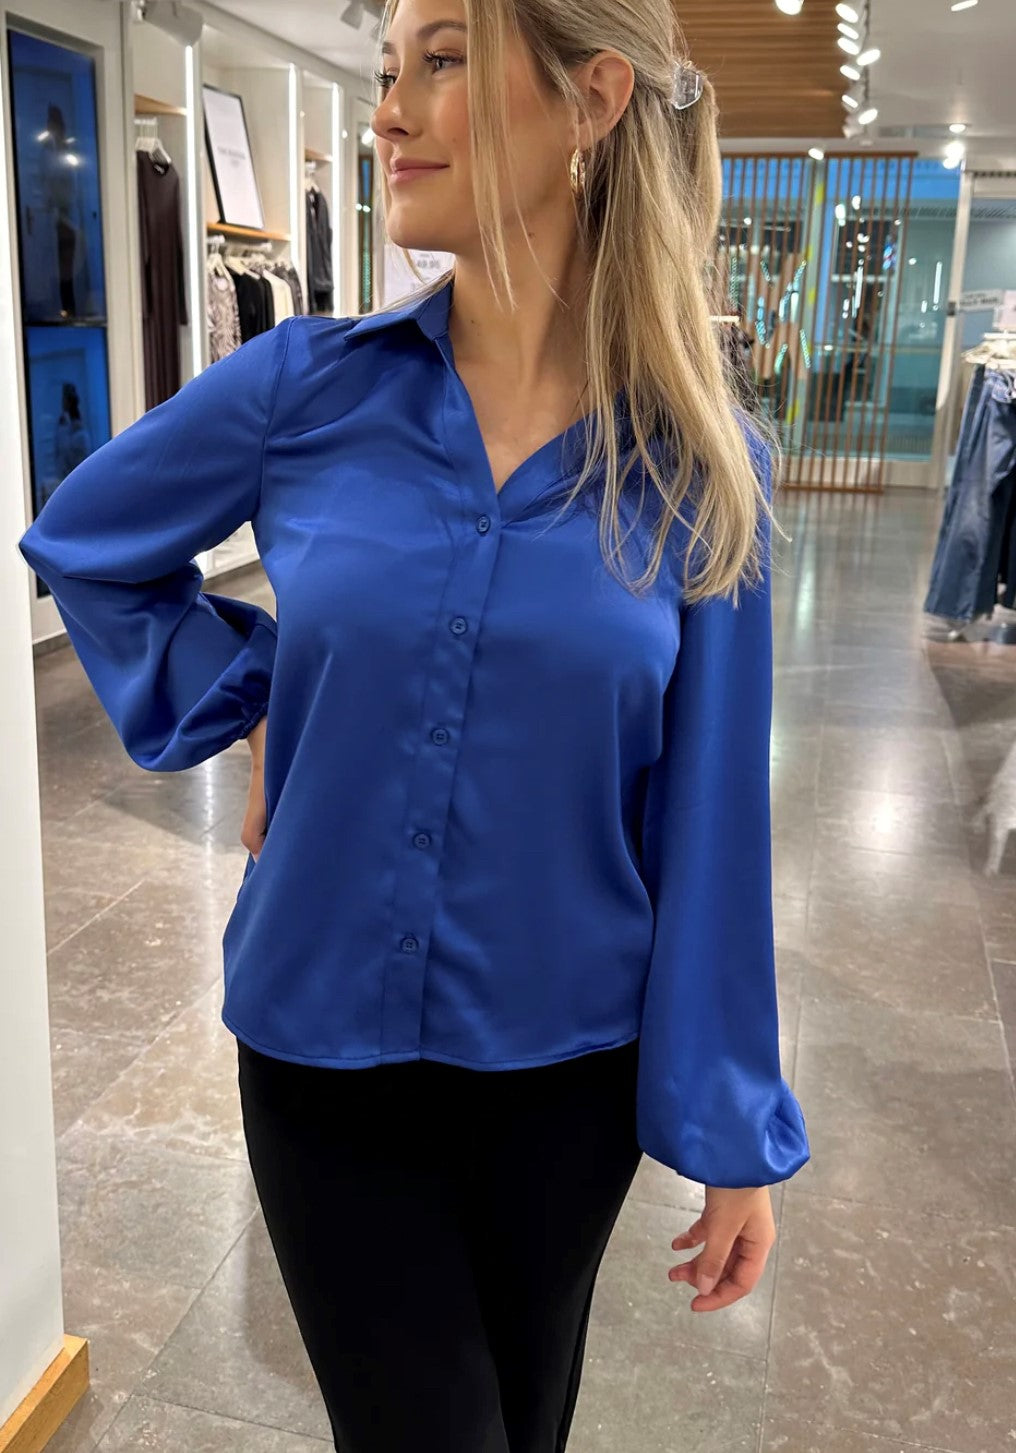 VMMERLE T-Shirts & Tops - Dazzling Blue